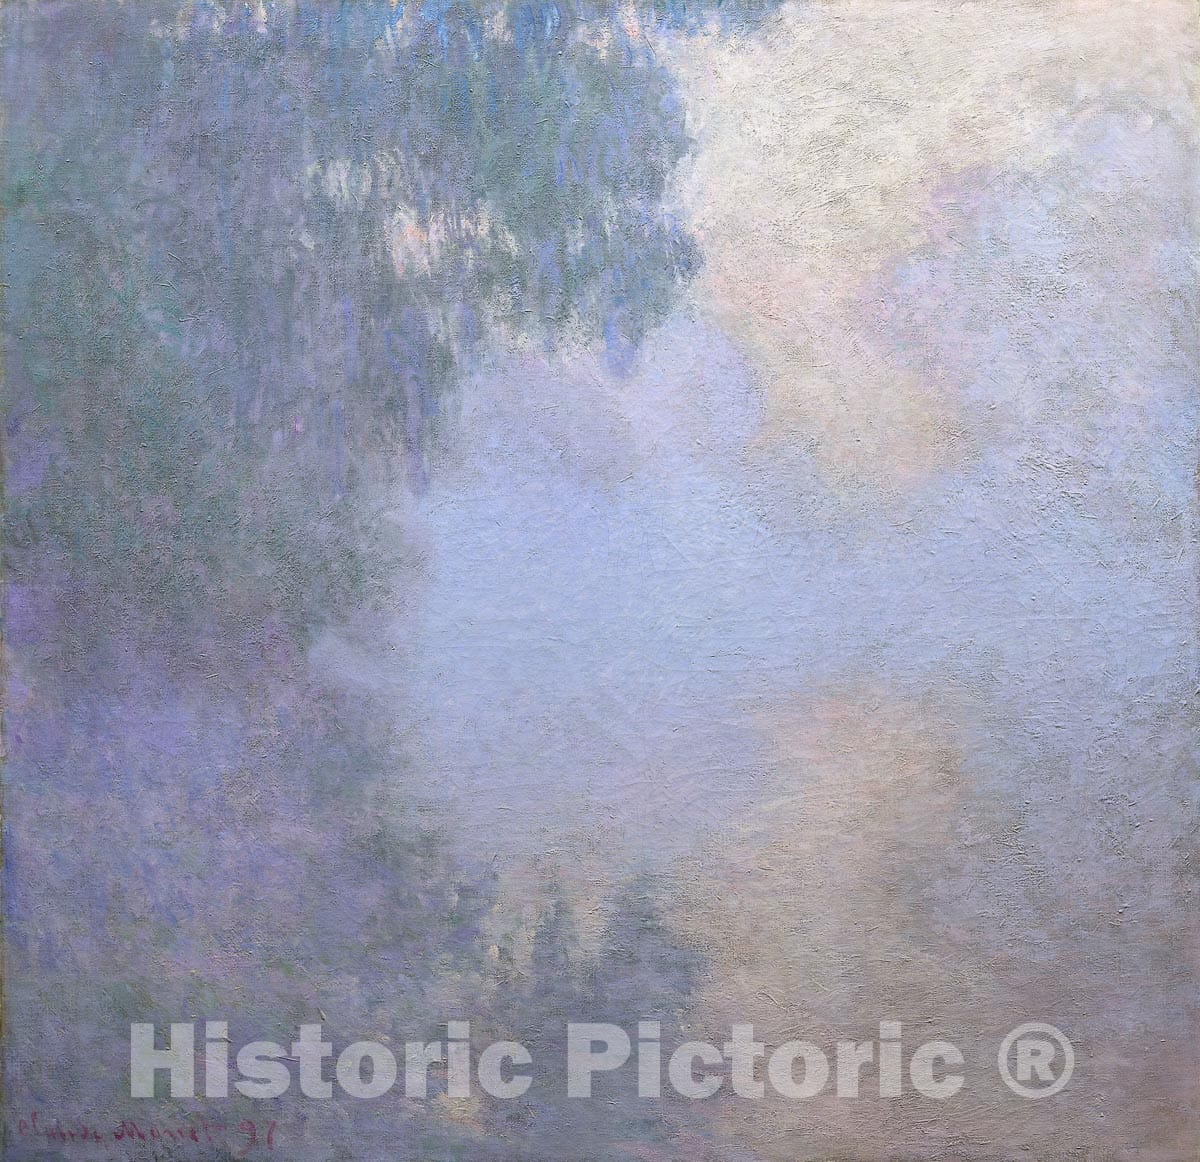 Art Print : Branch of the Seine near Giverny (Mist), from the series "Mornings on the Seine", Claude Monet, c 1897, Vintage Wall Decor :